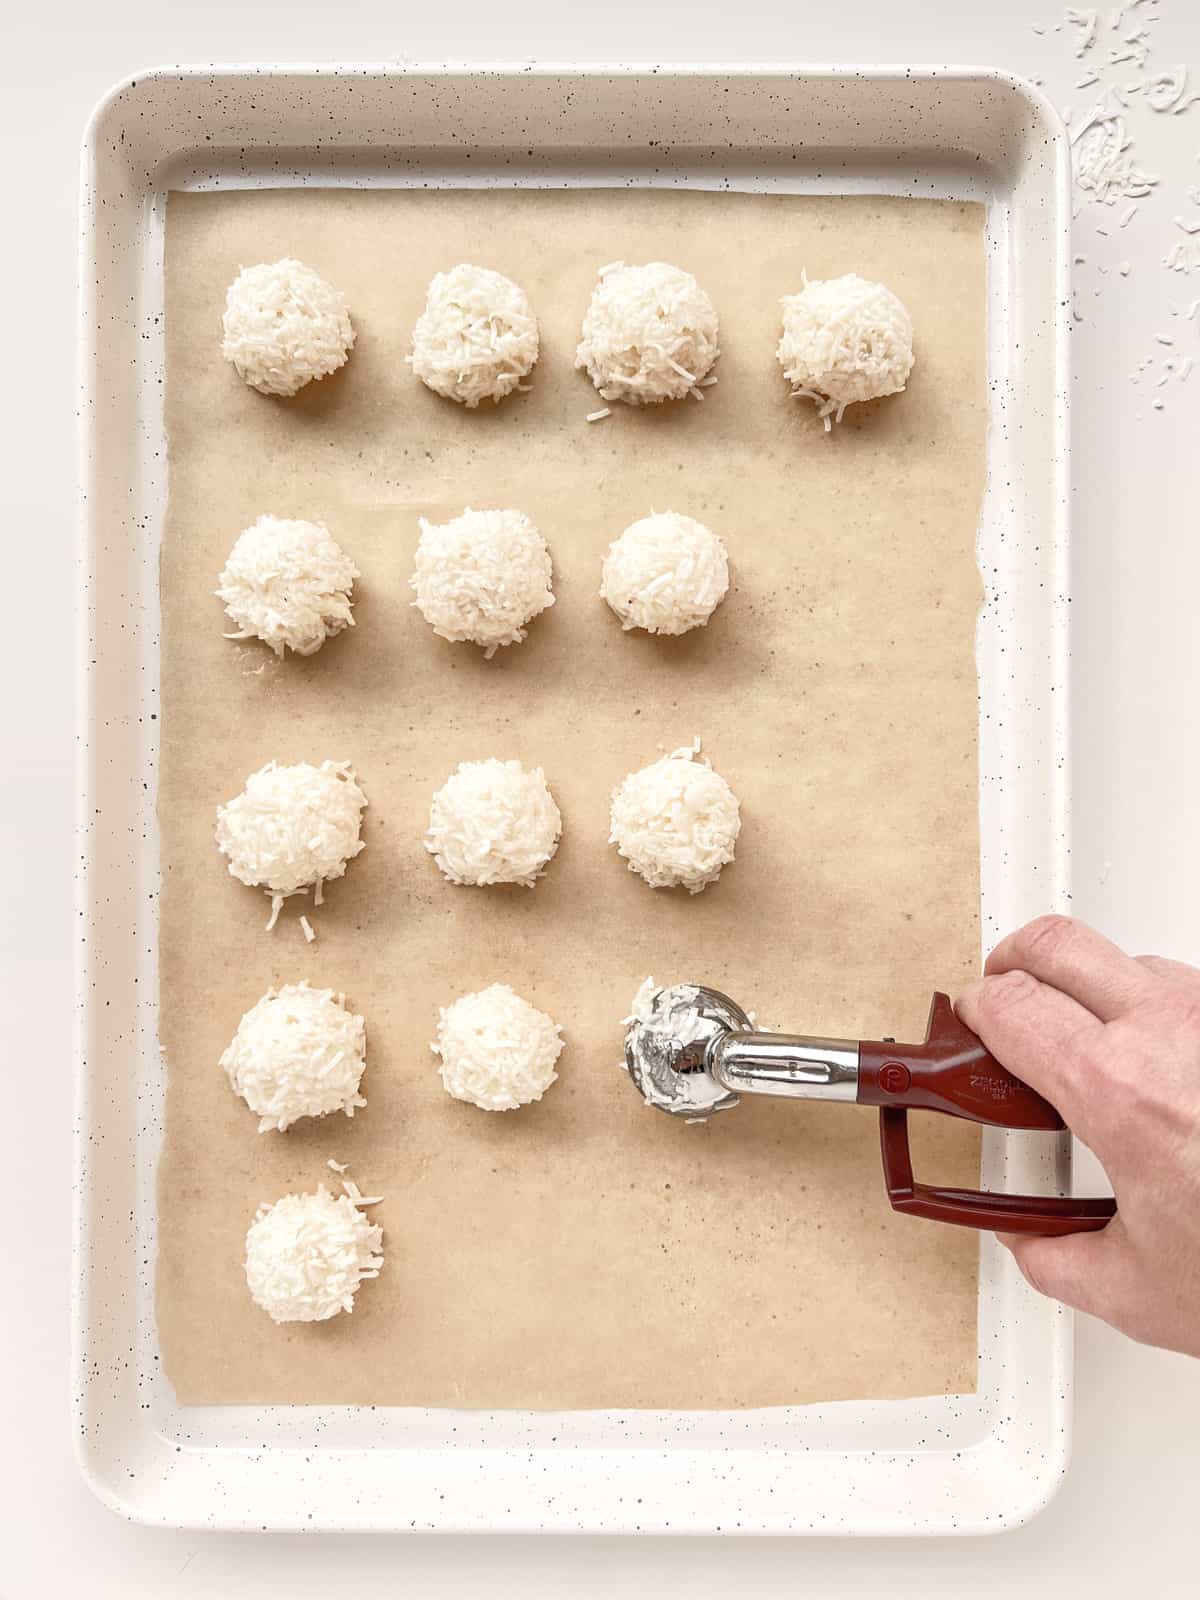 An image of the coconut mixture being scooped onto a baking sheet.